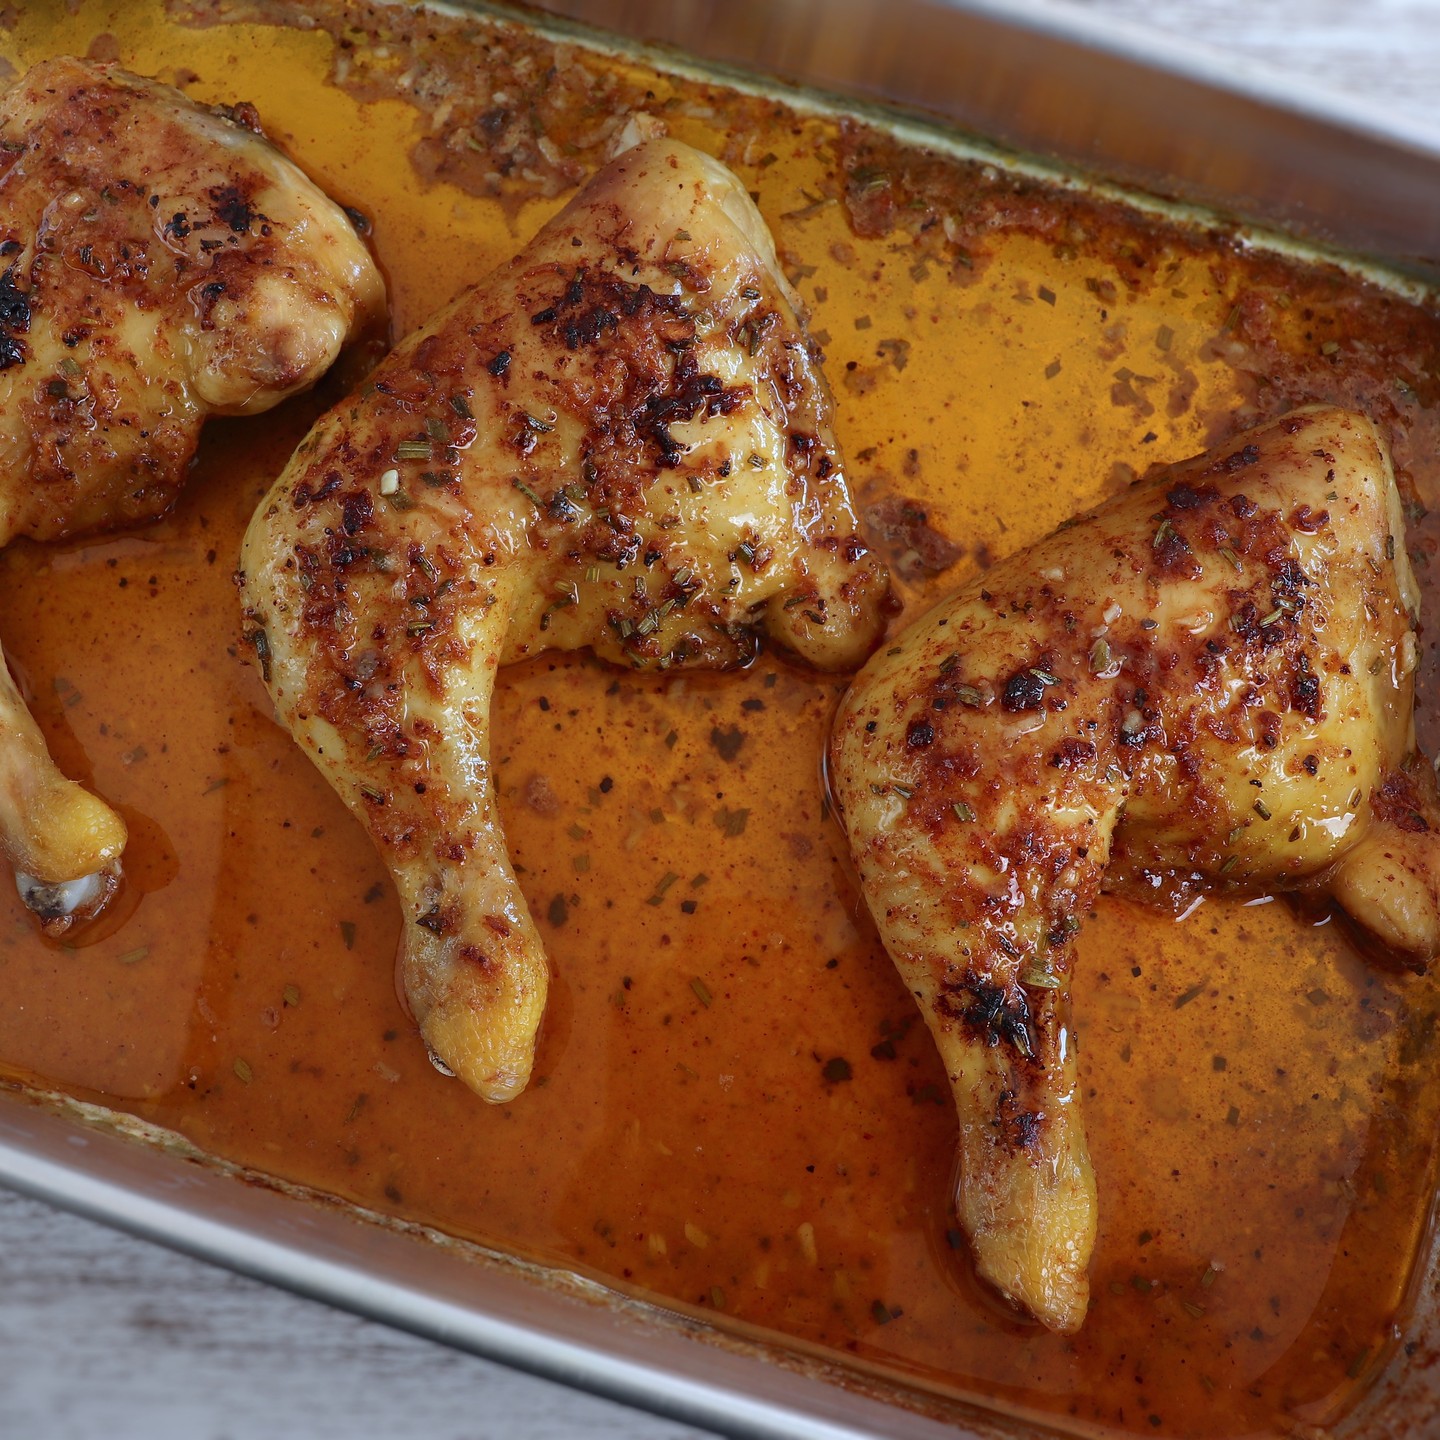 Spicy roasted chicken legs | Food From Portugal

Want to prepare a simple chicken recipe in the oven? Season the chicken legs with delicious spices, lemon juice and olive oil and roast until golden. Bon appetit!!!

Recipe: https://www.foodfromportugal.com/recipes/spicy-roasted-chicken-legs/

#food #easy #easyrecipes #instafood #recipe #recipes #chicken #chickenlegs #spicy #roasted #roastedchicken #homemade